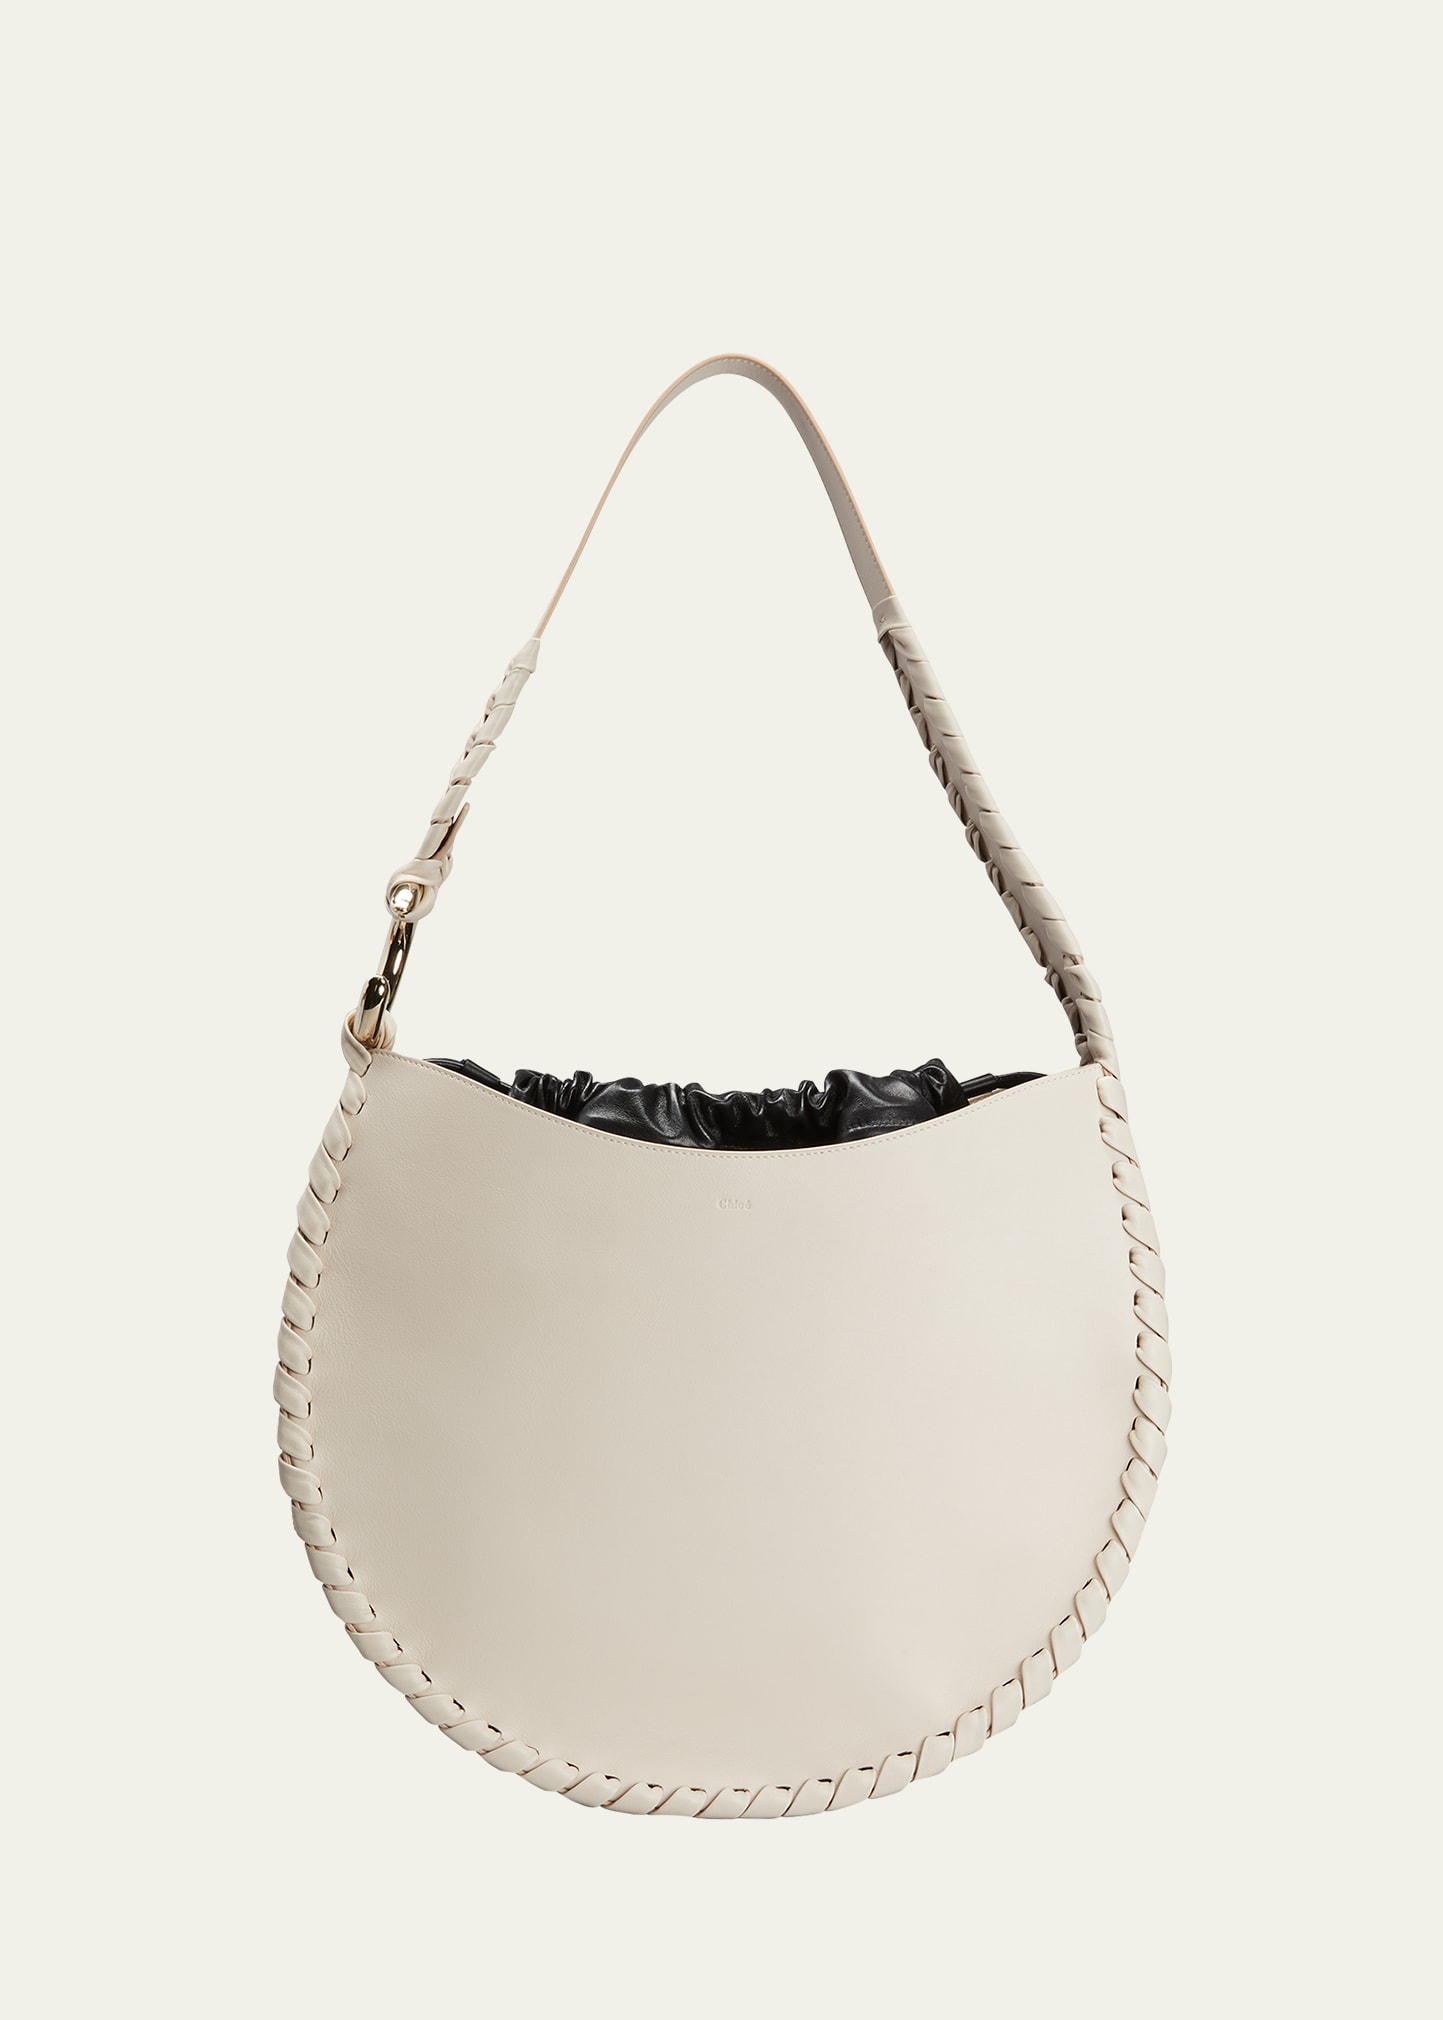 Chloé Mate Large Woven Leather Drawstring Hobo Bag In 6h3 Nude